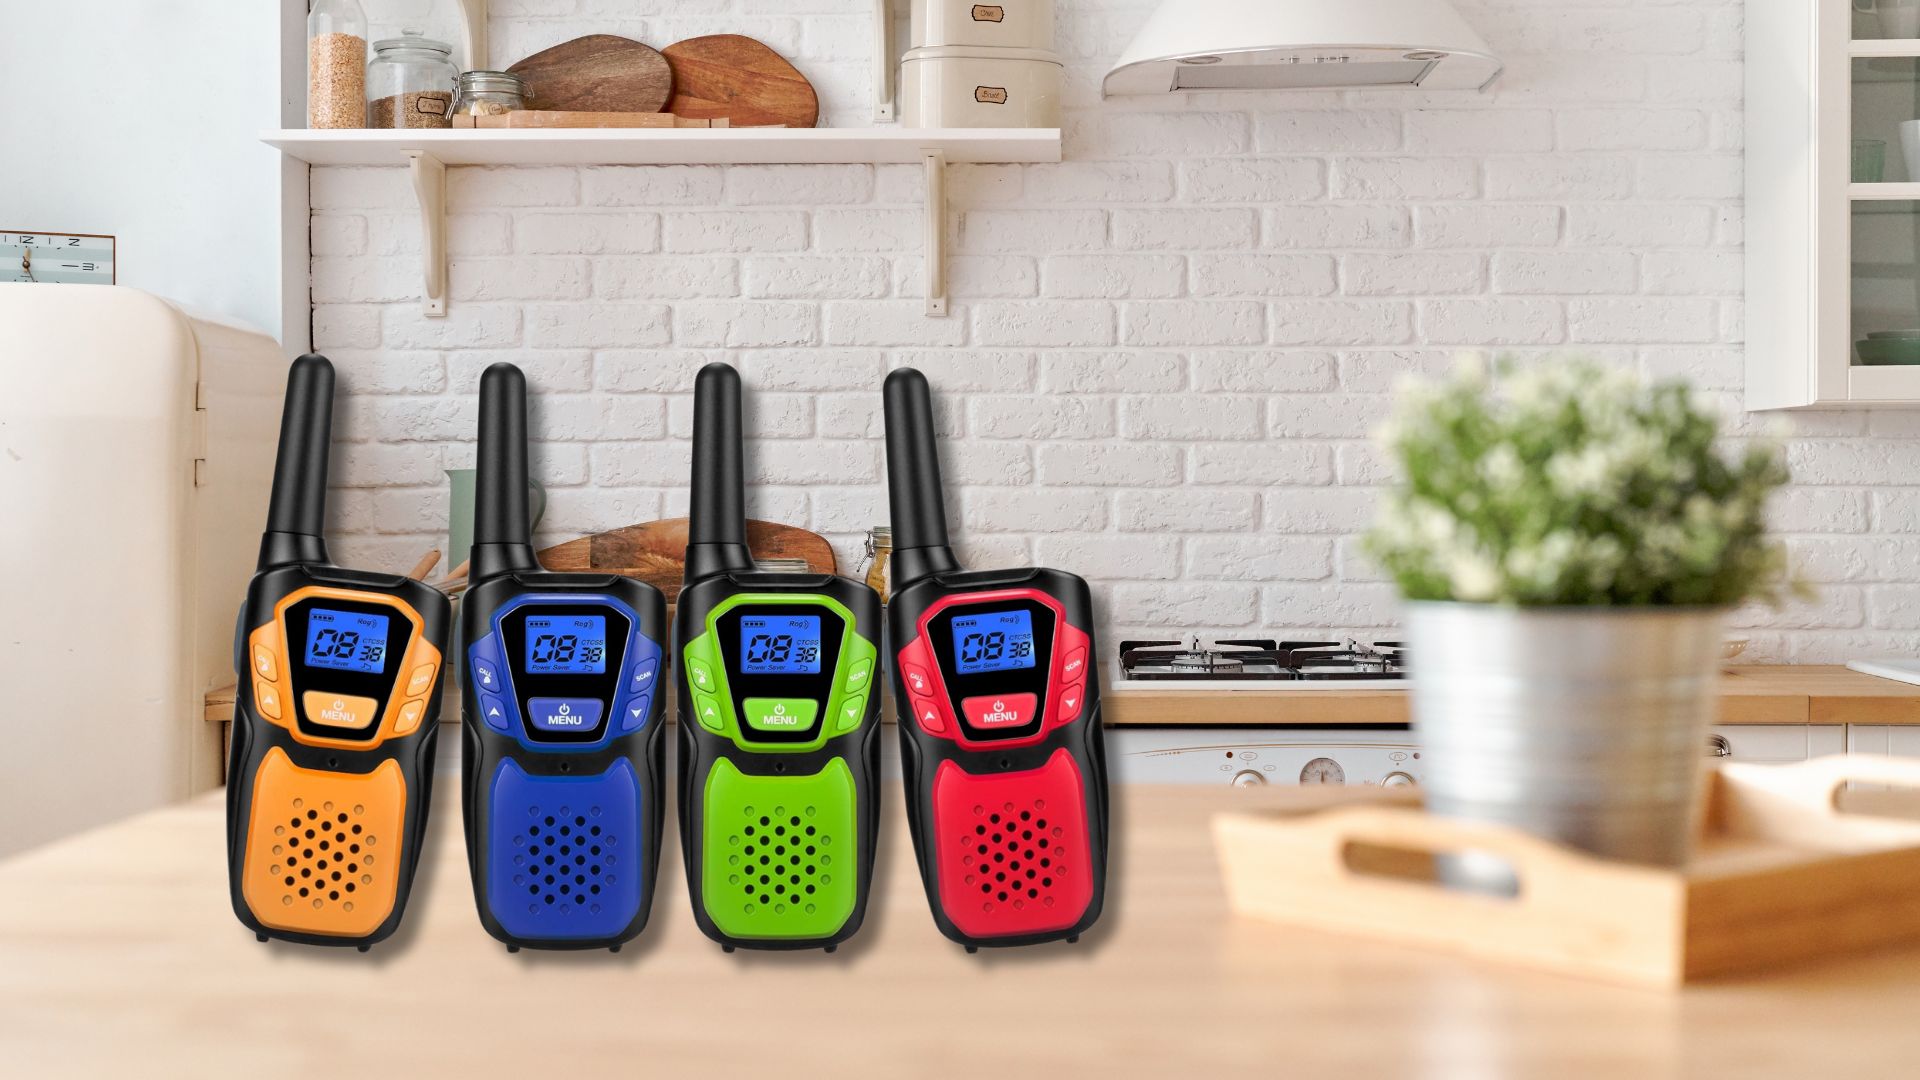 4 Topsung M920 Walkie Talkies on a kitchen counter